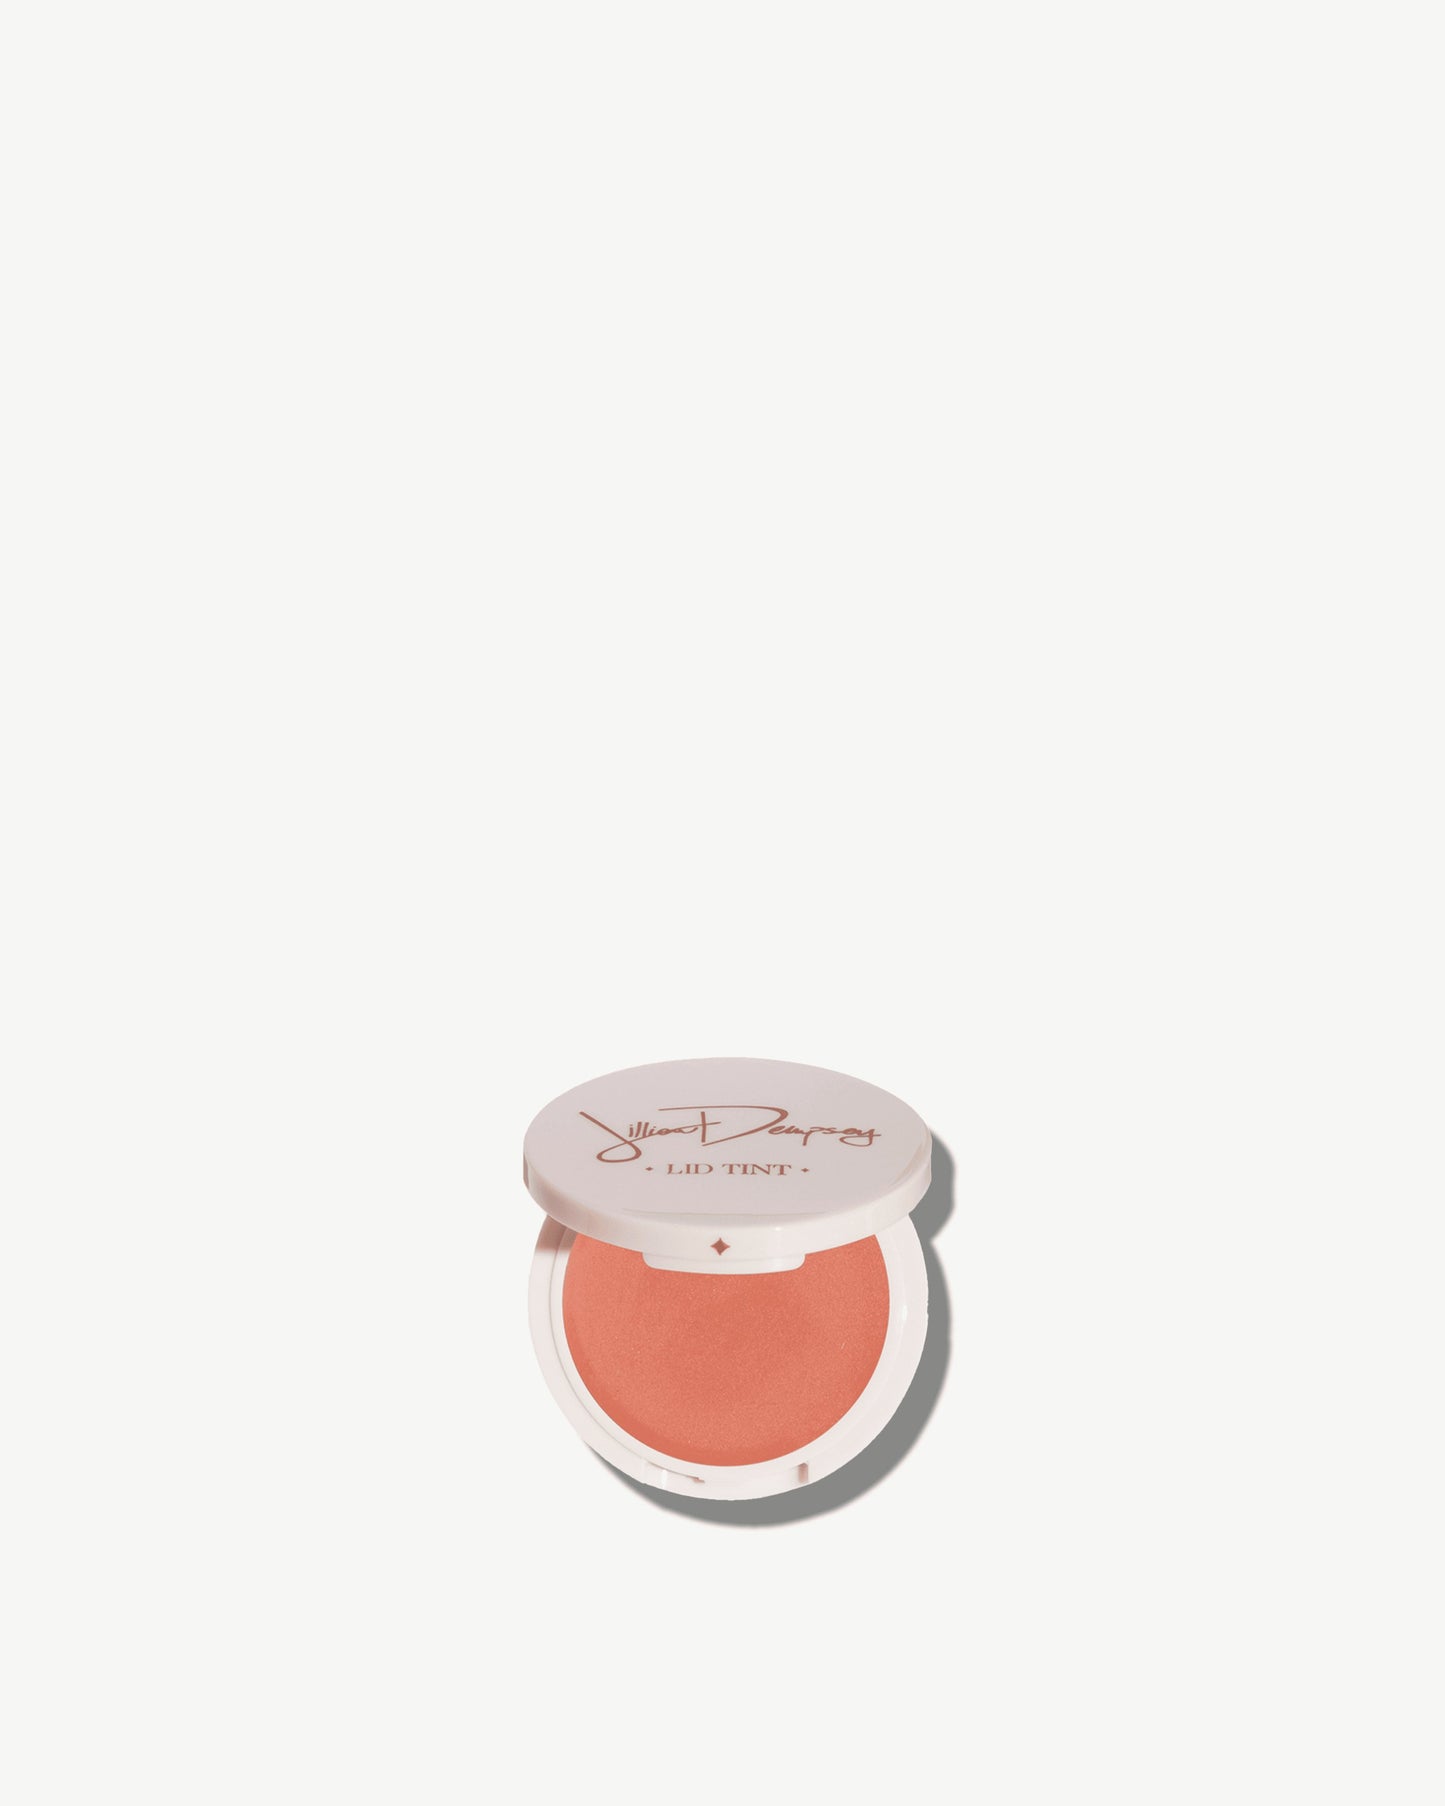 Jillian Dempsey Lid Tint in Glimmer (pale golden peach shimmer) - Recipient of the 2019 Byrdie Eco Beauty Award